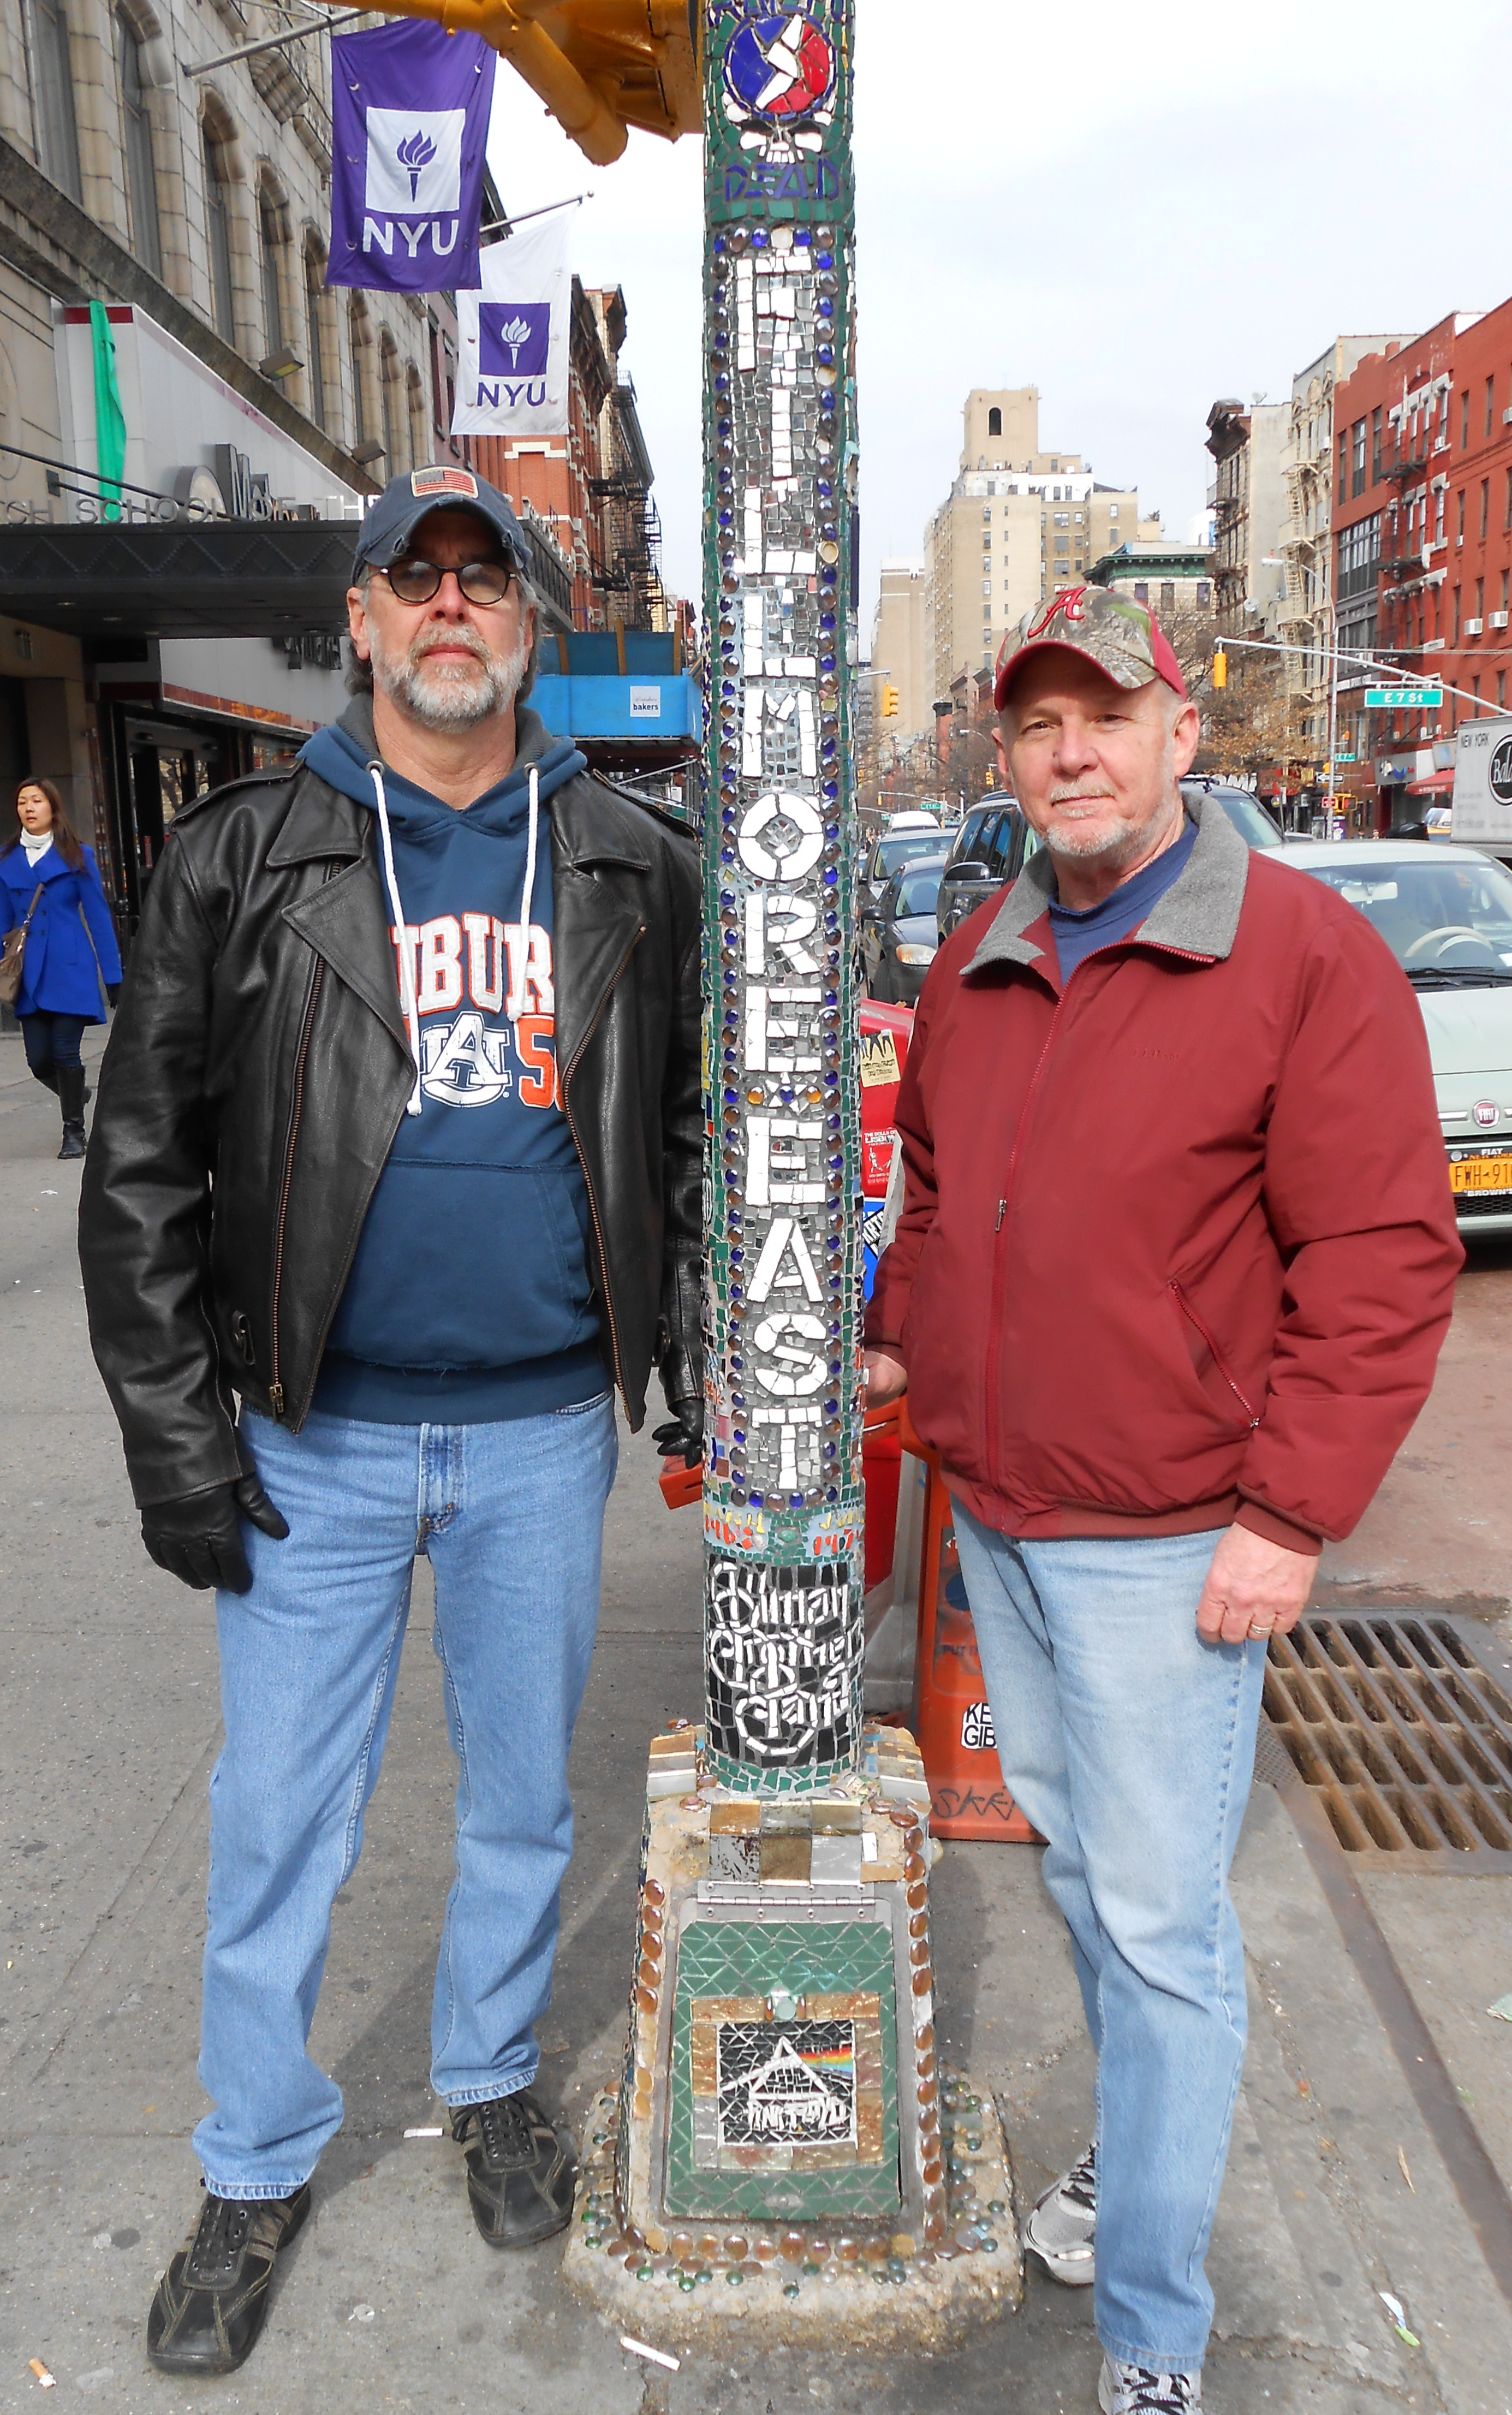 Me and Mike Jellison at the  Fillmore East totem at the old Fillmore East site during the 2012 Beacon run.